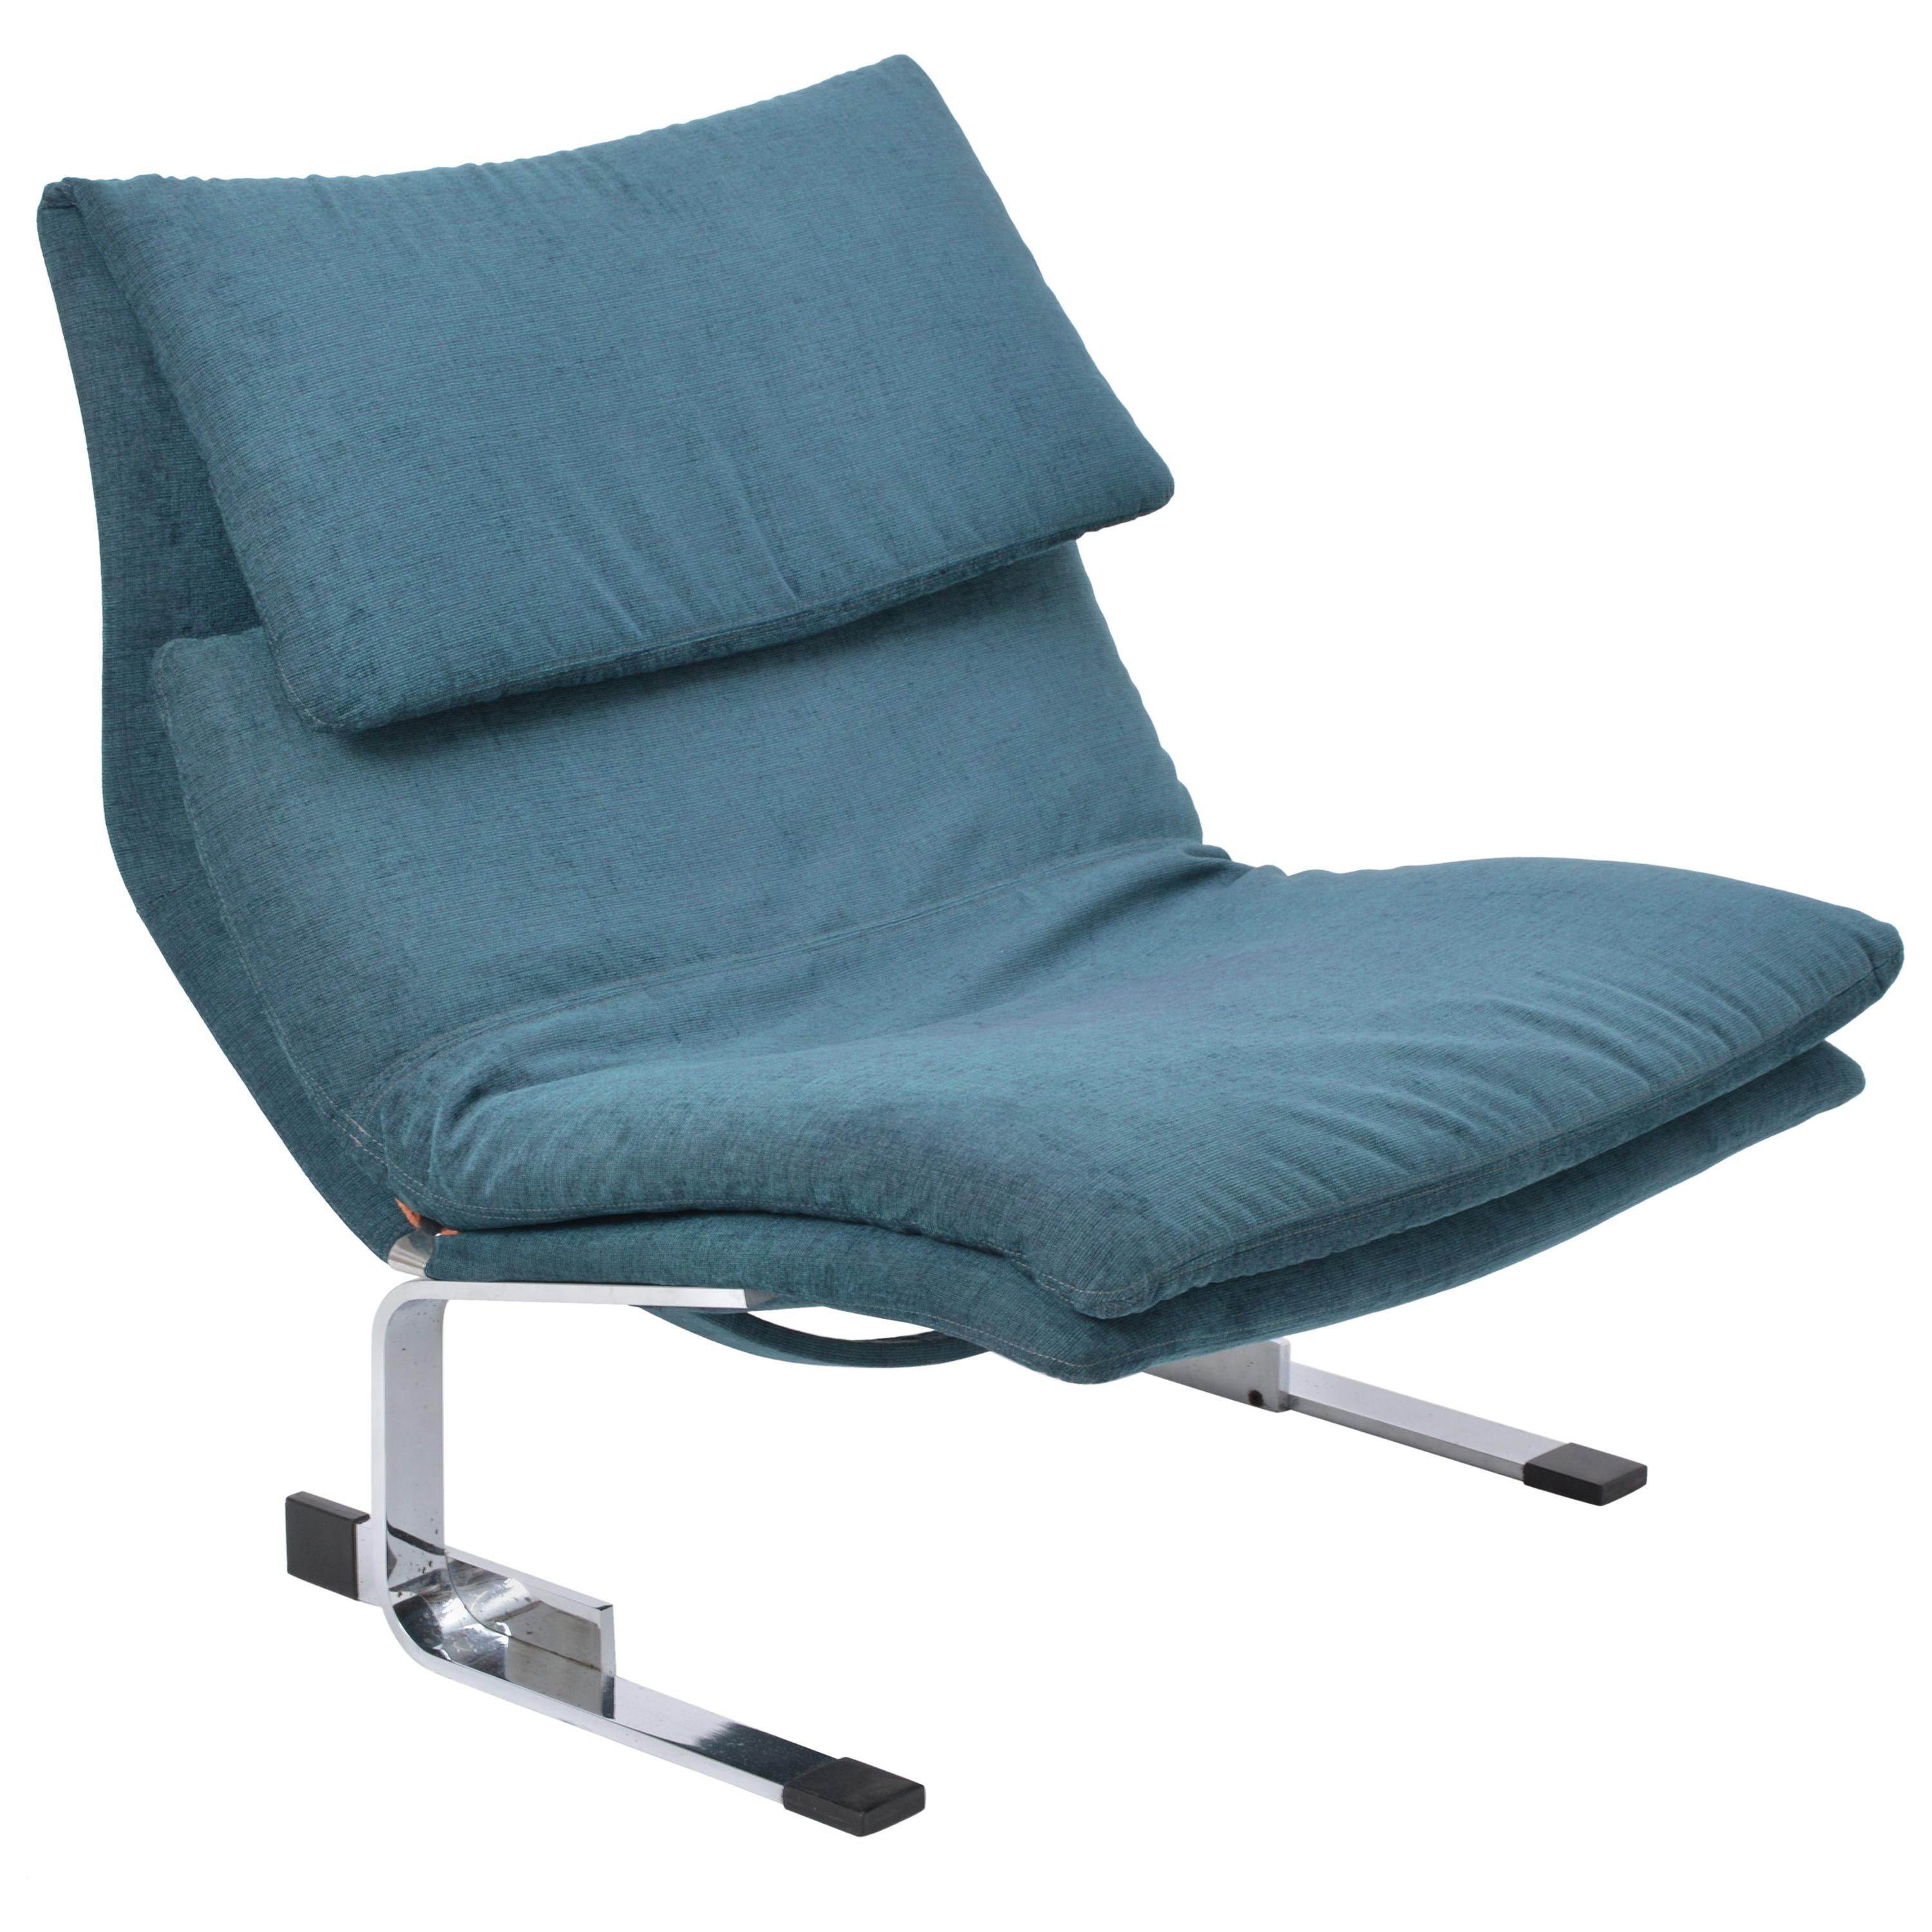 Reupholstered Post Modern Onda lounge chair by Giovanni Offredi for Saporiti